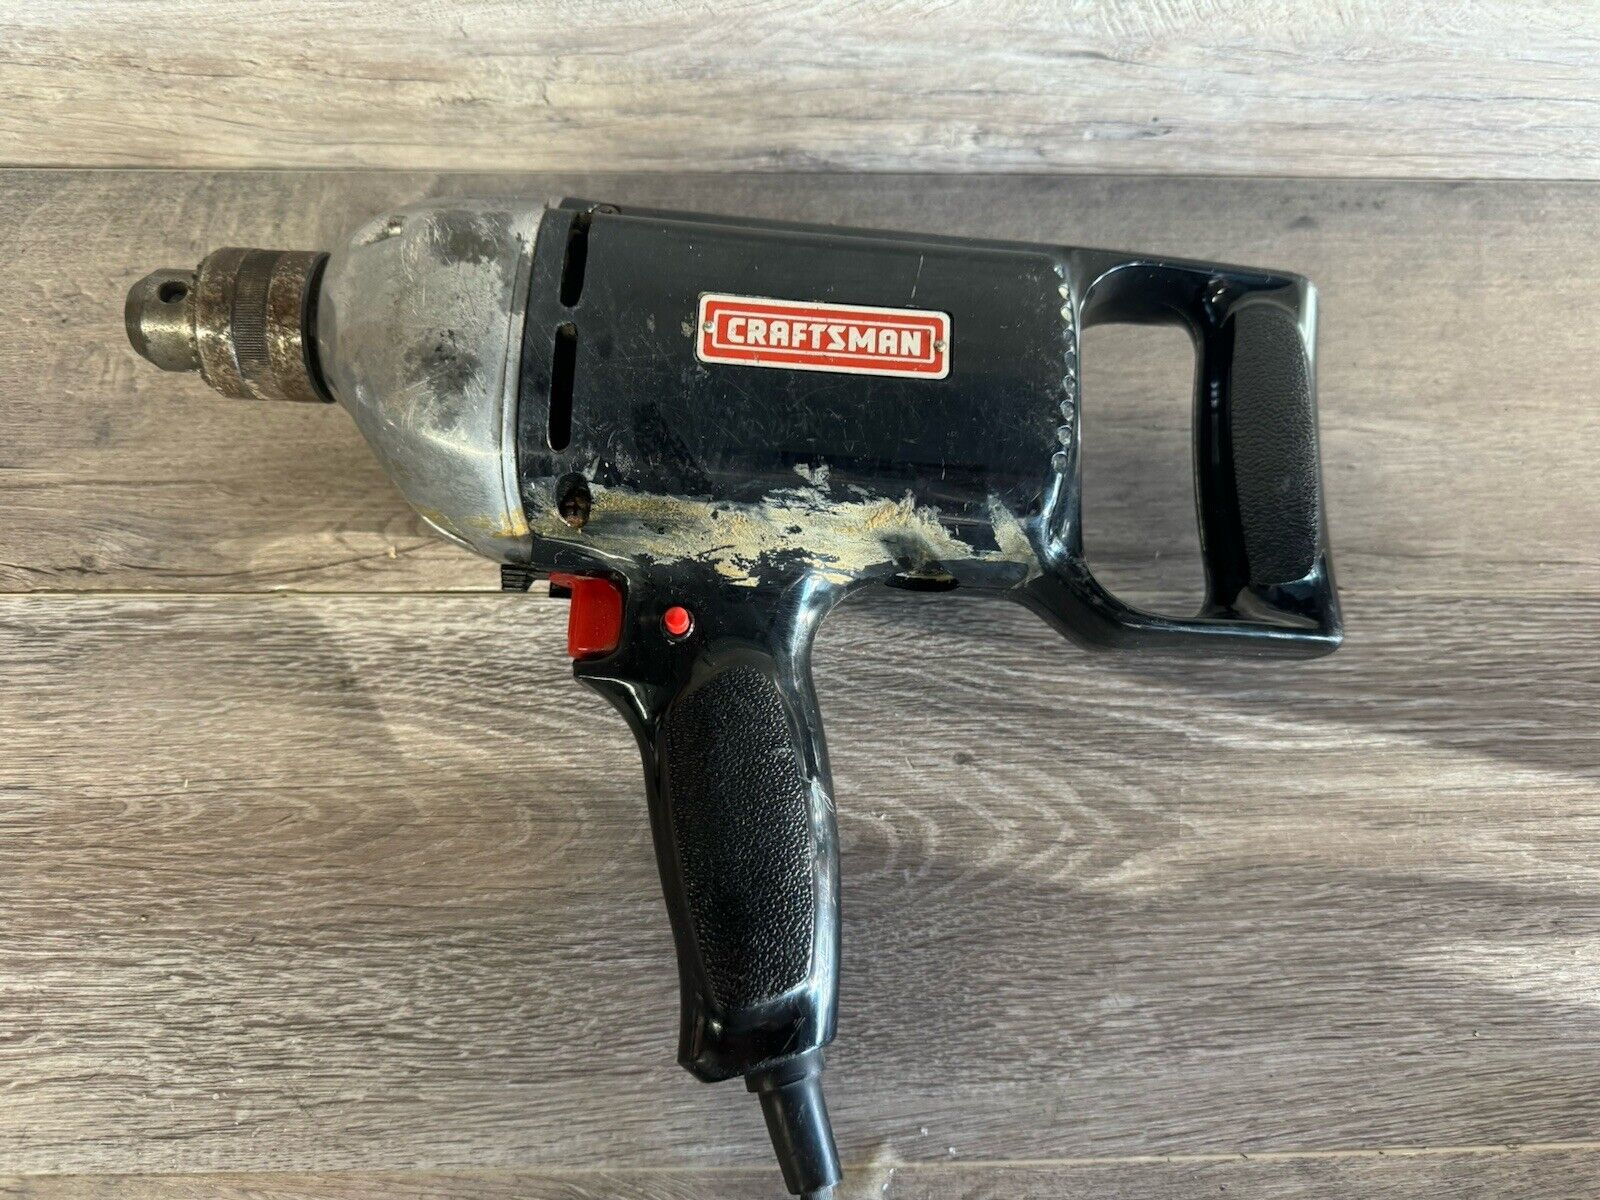 Craftsman 315.11290 Electric 1/2” Drill Heavy Duty Variable Speed Reversible